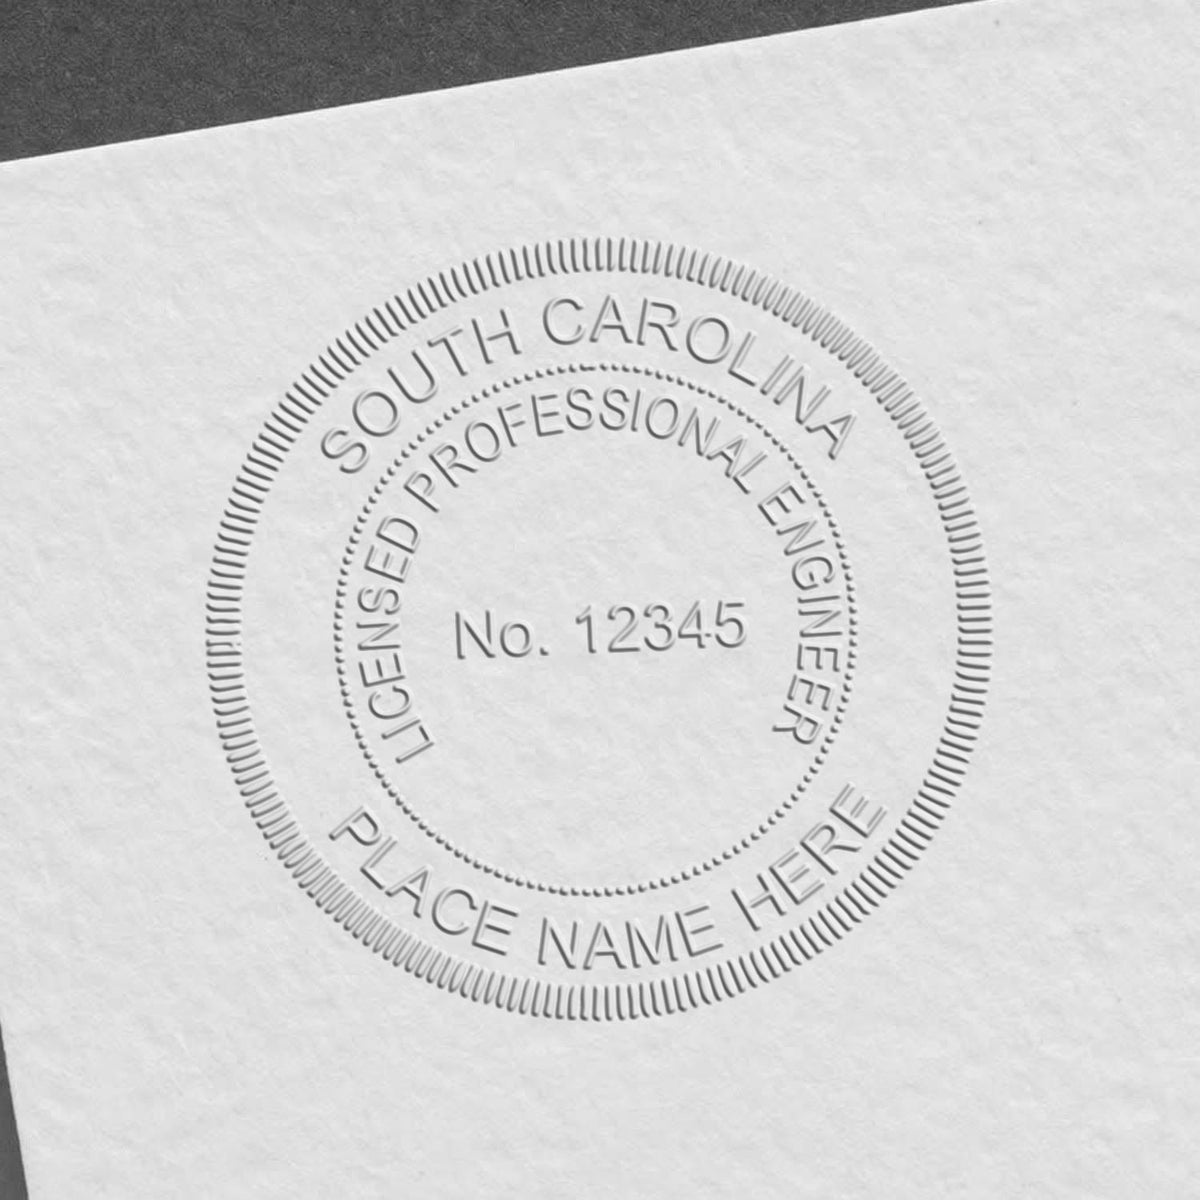 The Heavy Duty Cast Iron South Carolina Engineer Seal Embosser stamp impression comes to life with a crisp, detailed photo on paper - showcasing true professional quality.